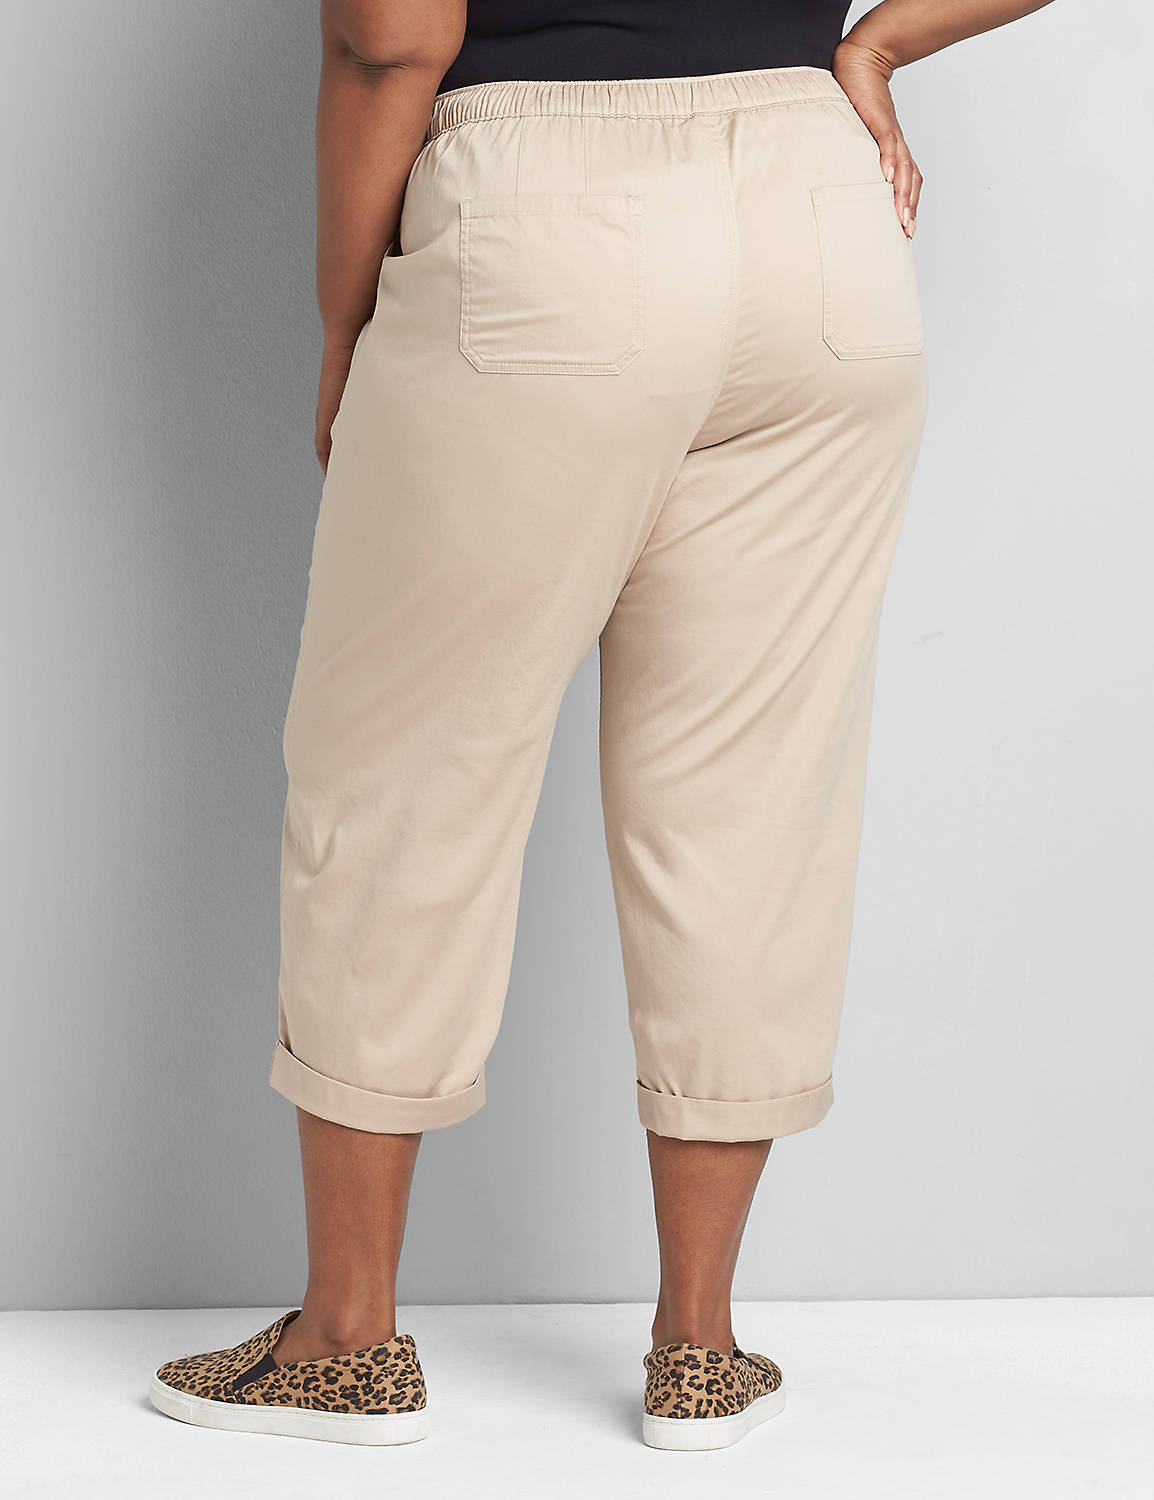 Pull-On Soft Capri with Printed Drawcord 1119737:Oyster Bay CSI 0801460:28 Product Image 2